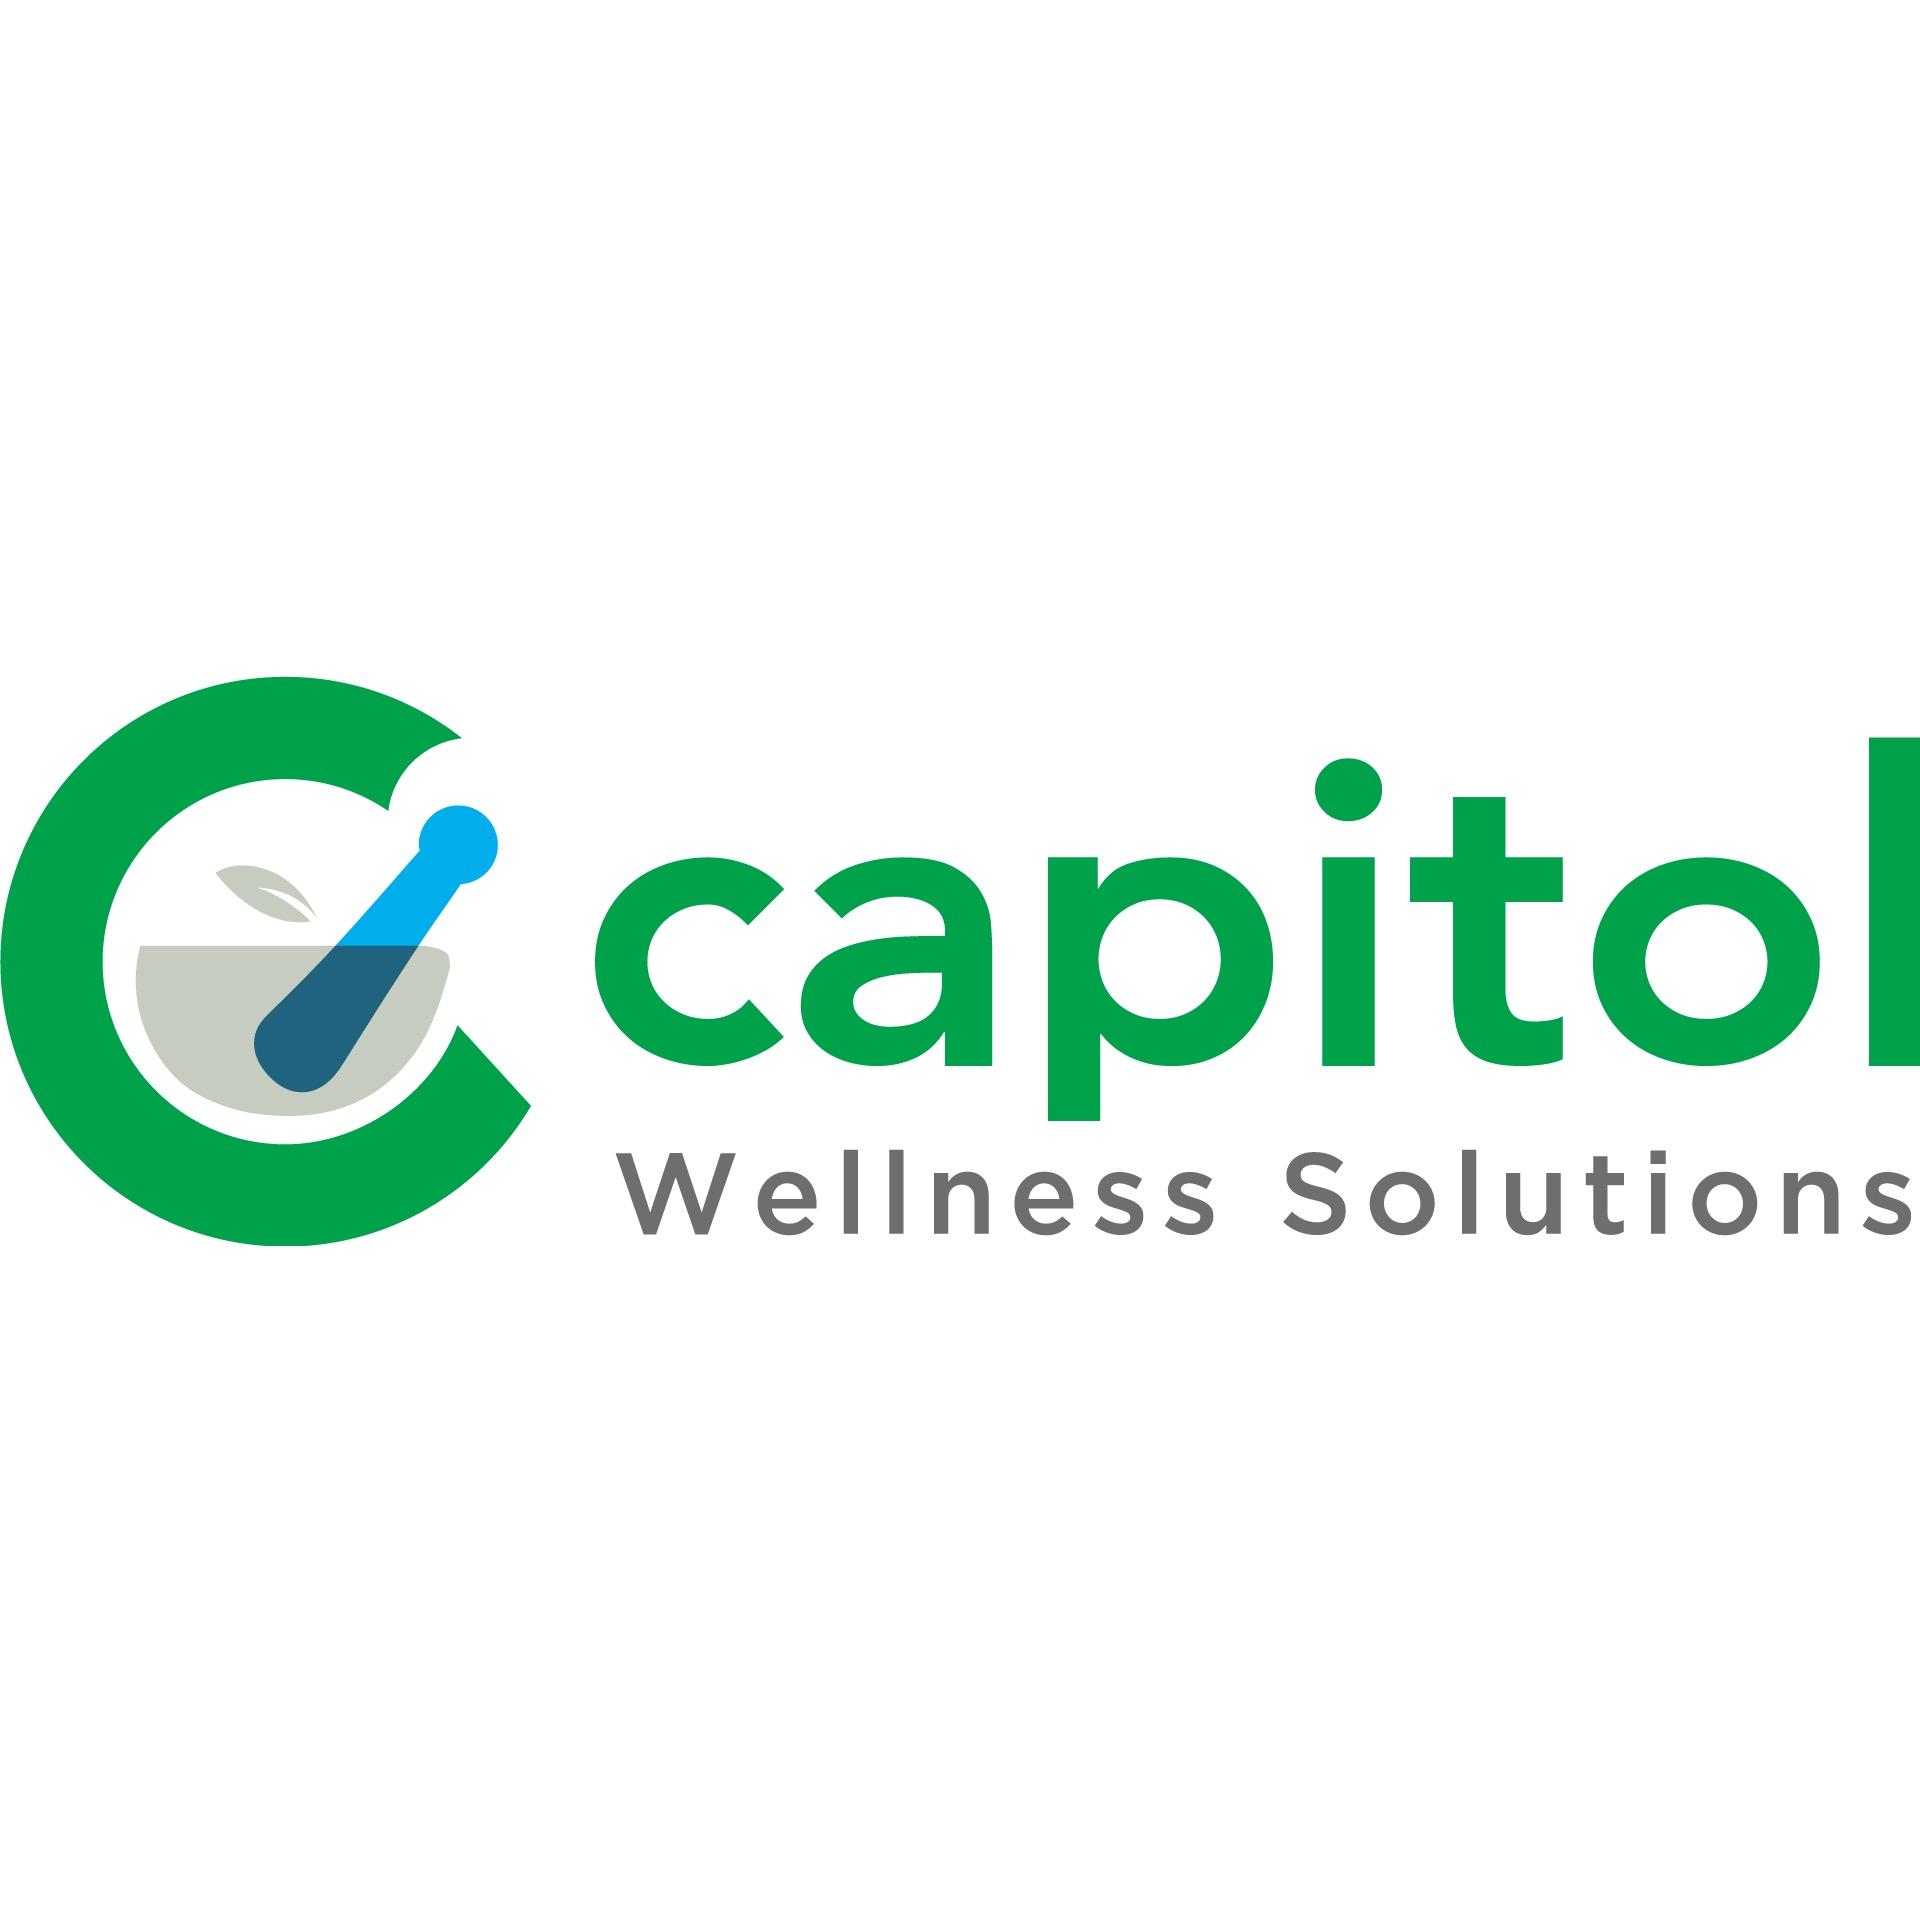 Capitol Wellness Solutions Photo